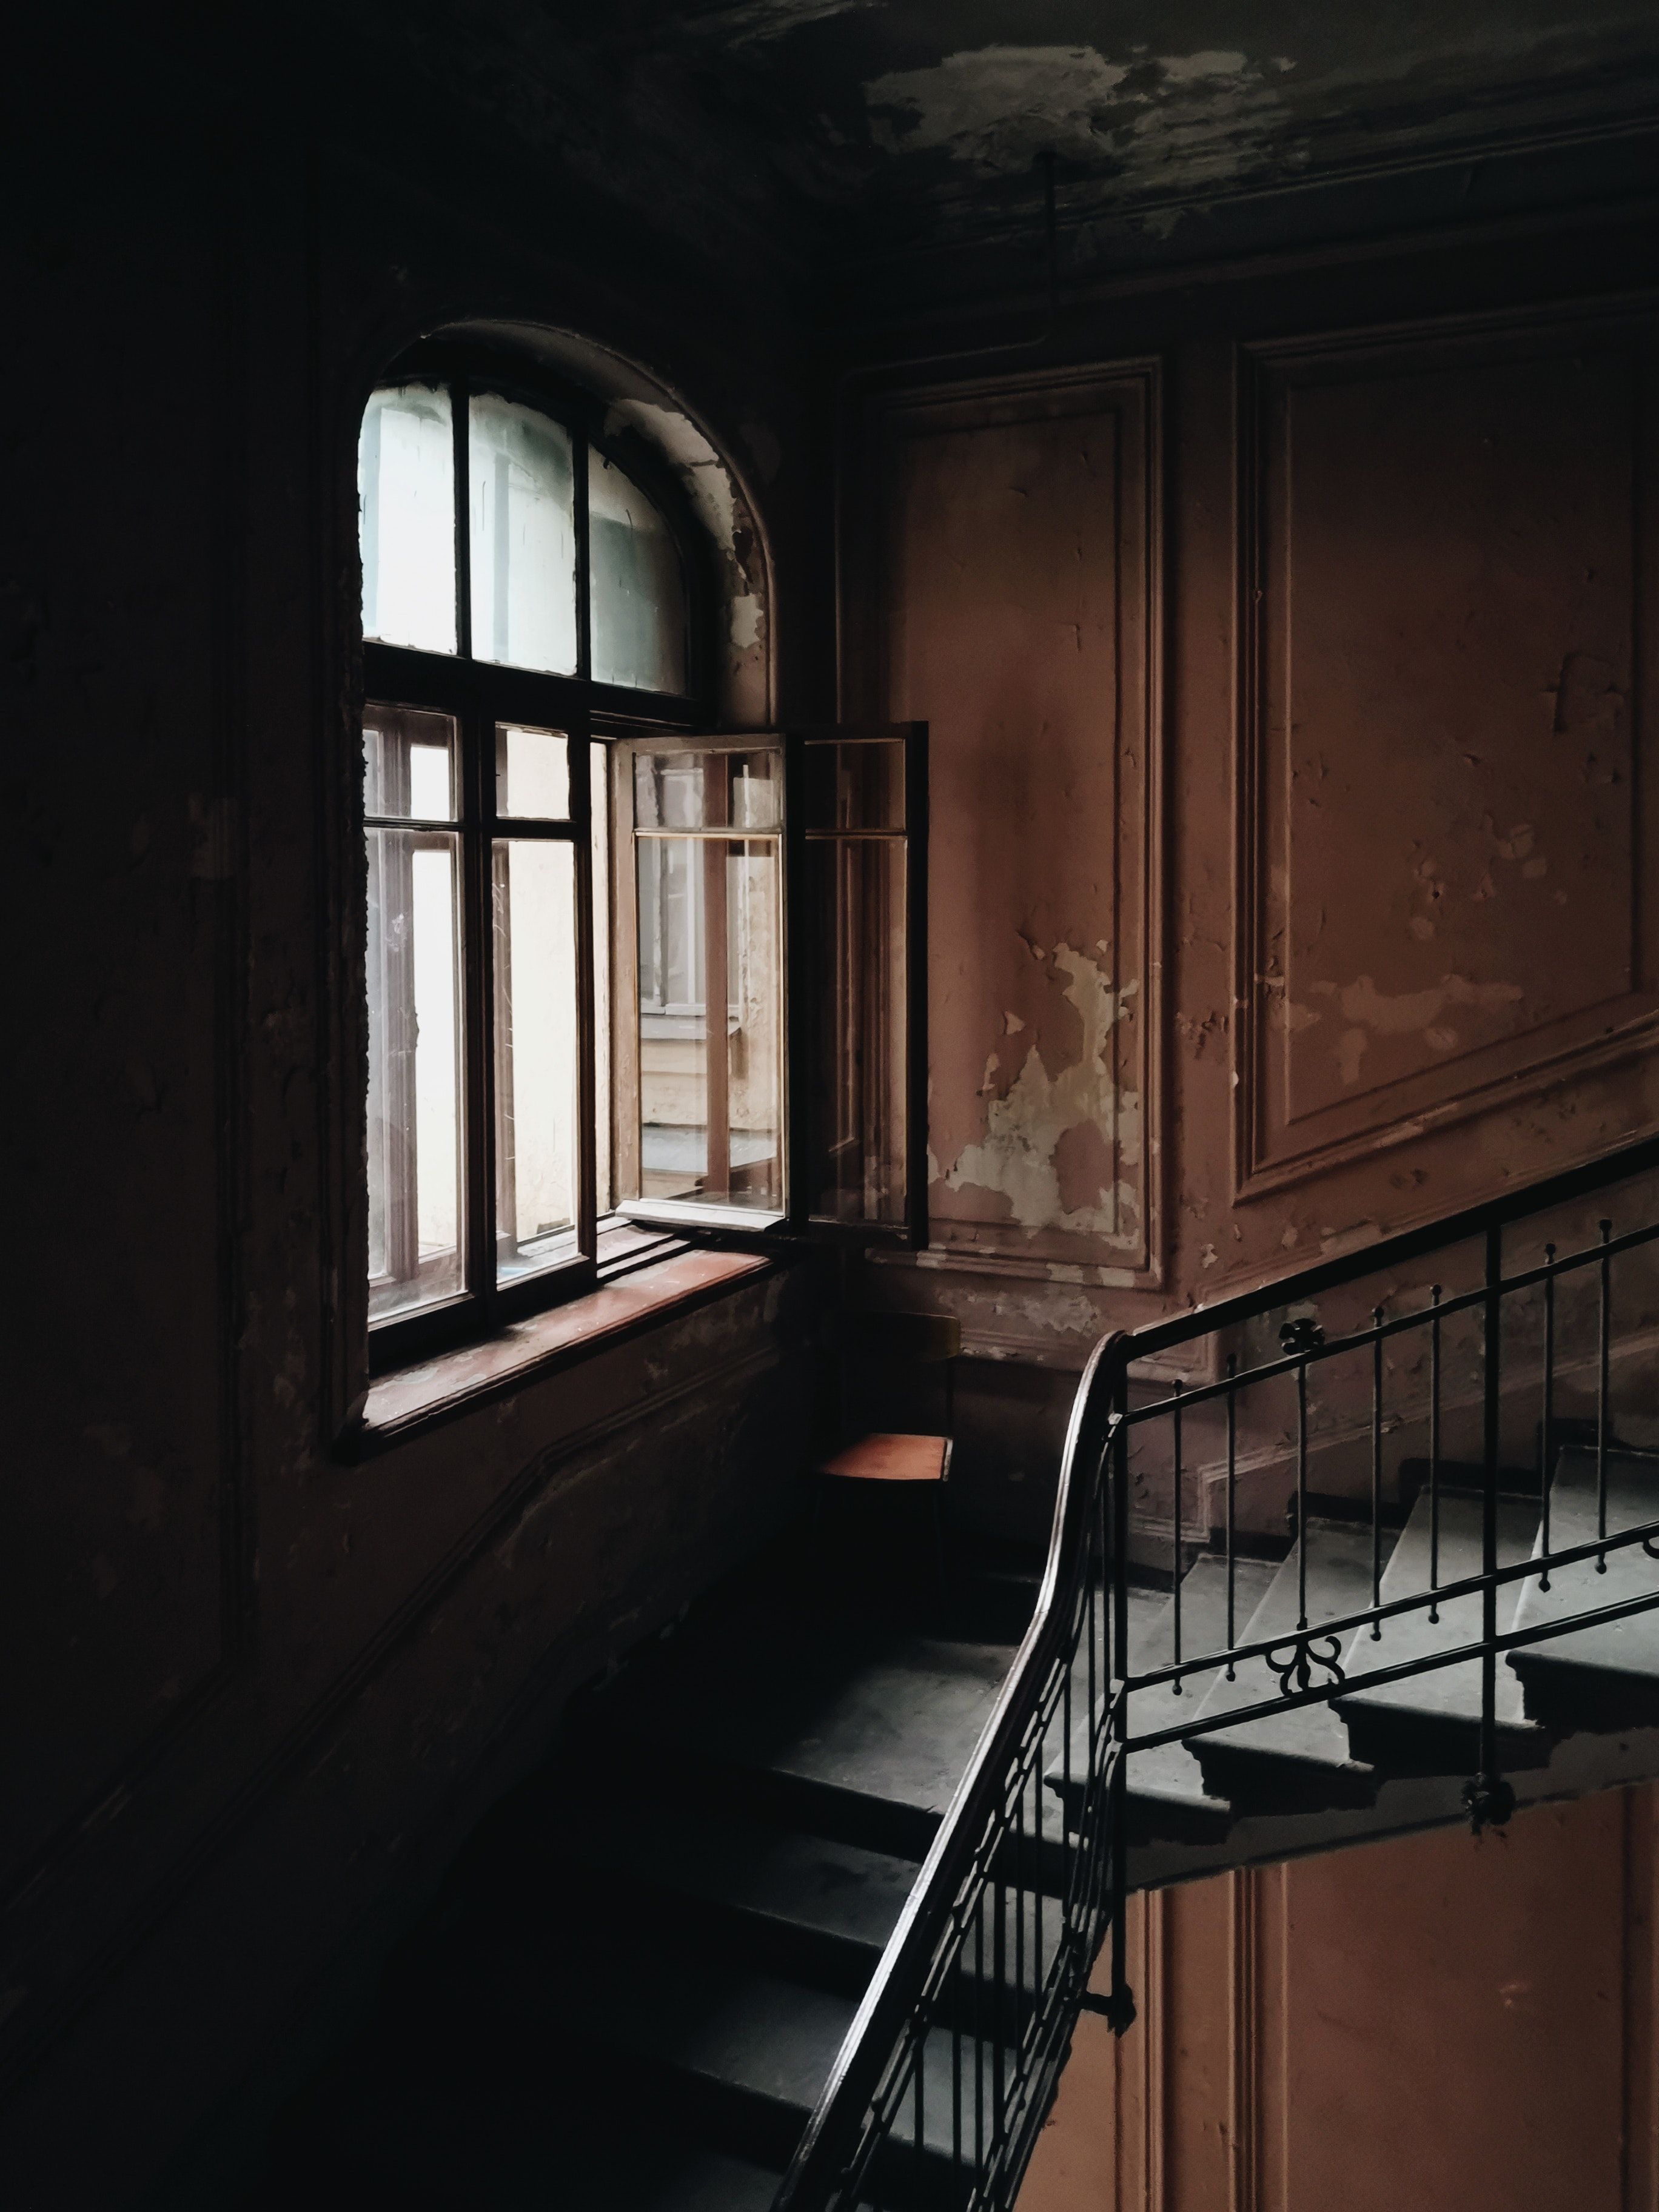 A dark stairwell with a rusted railing and a window letting in light. - Black, sad